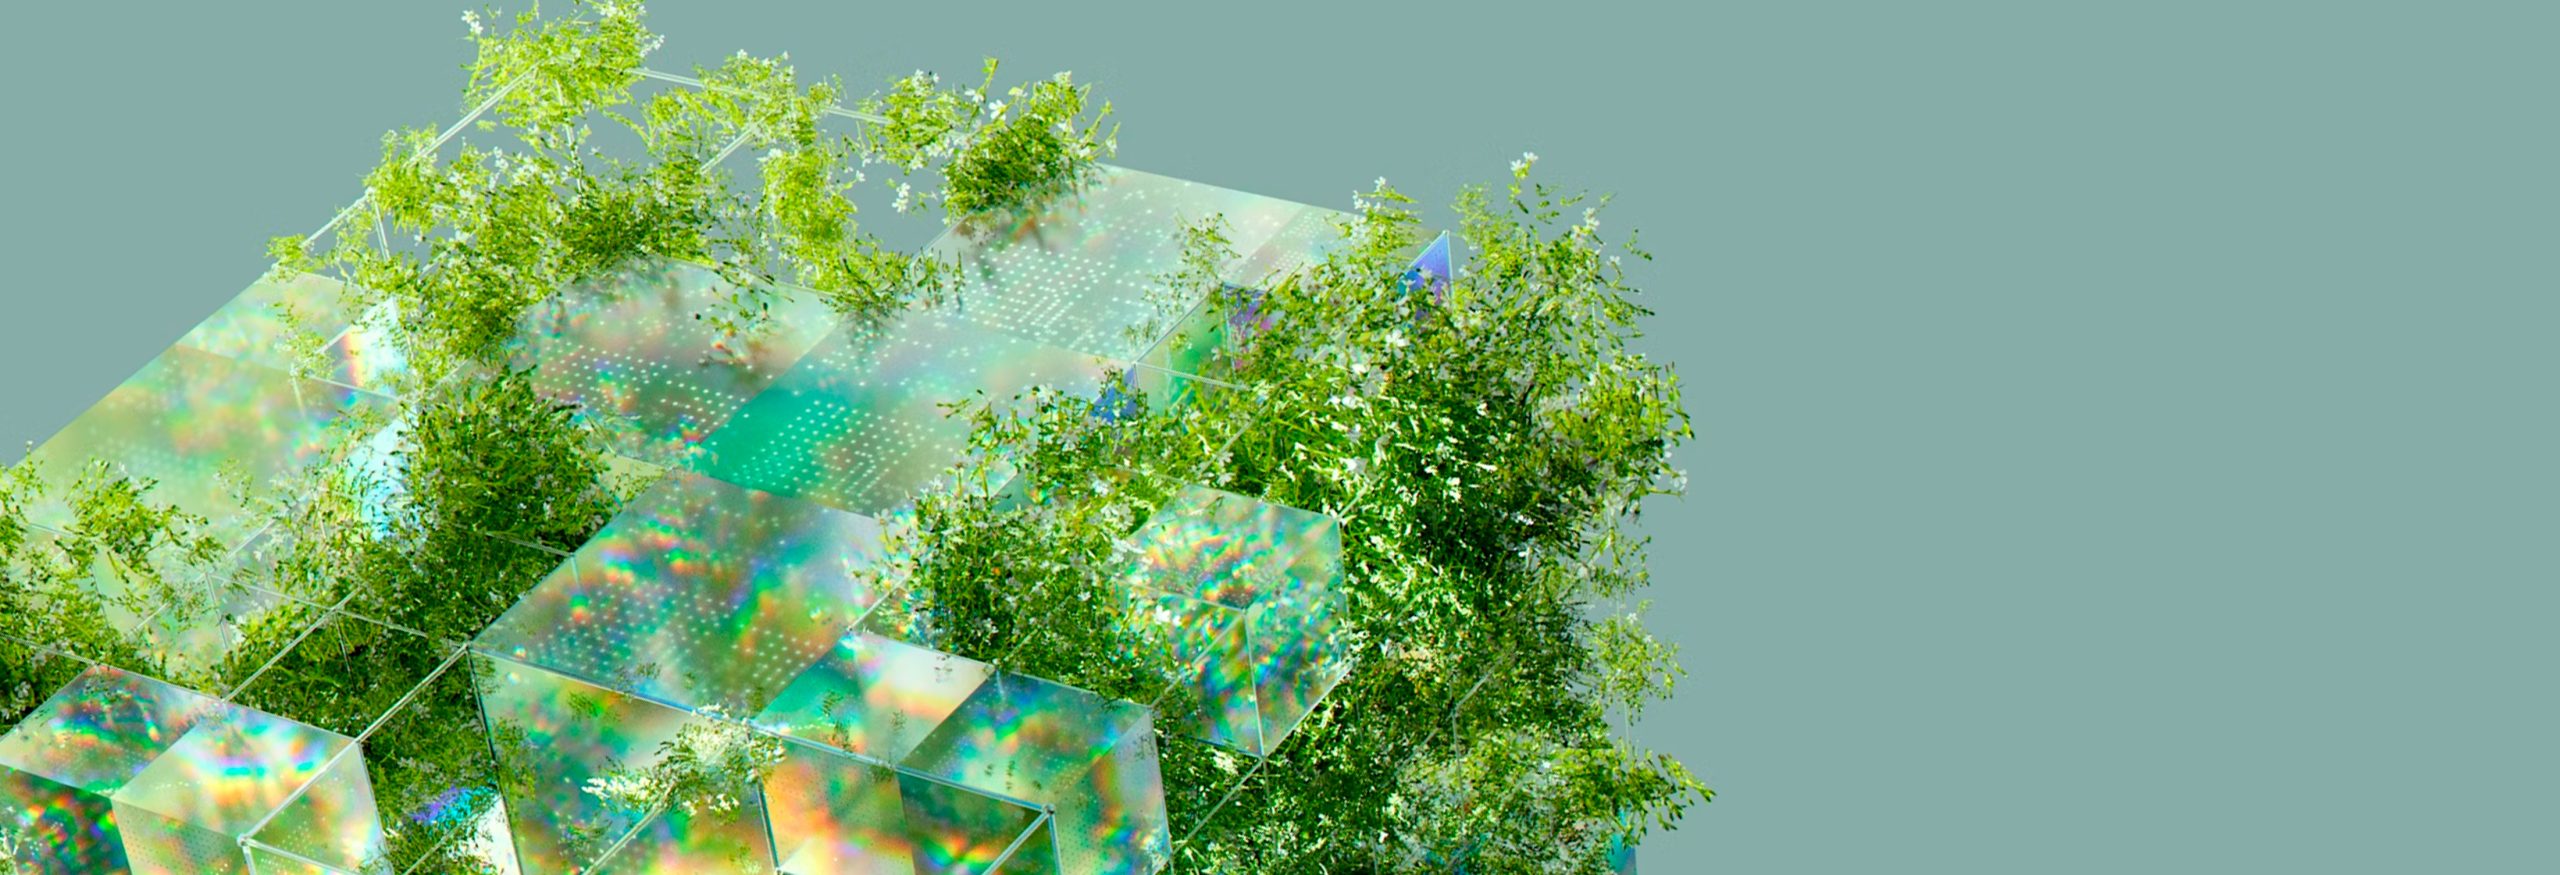 A transparent cube with greenery,